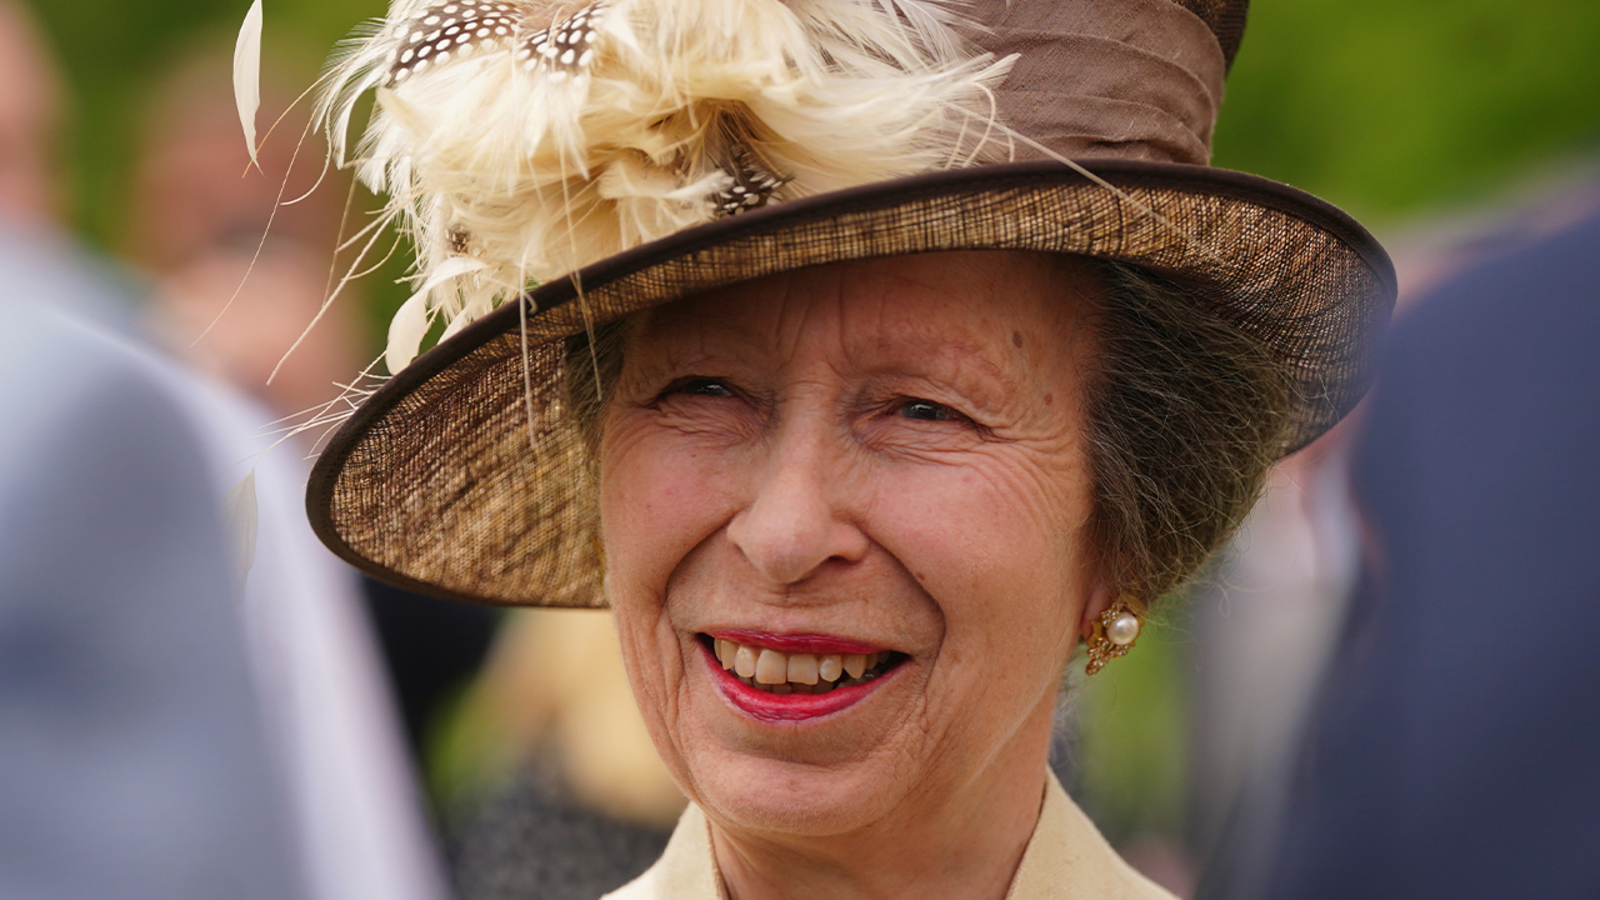 Royal Family: King Charles’ sister, Princess Anne, sustains minor injuries and concussion in an ‘incident,’ Buckingham Palace says [Video]